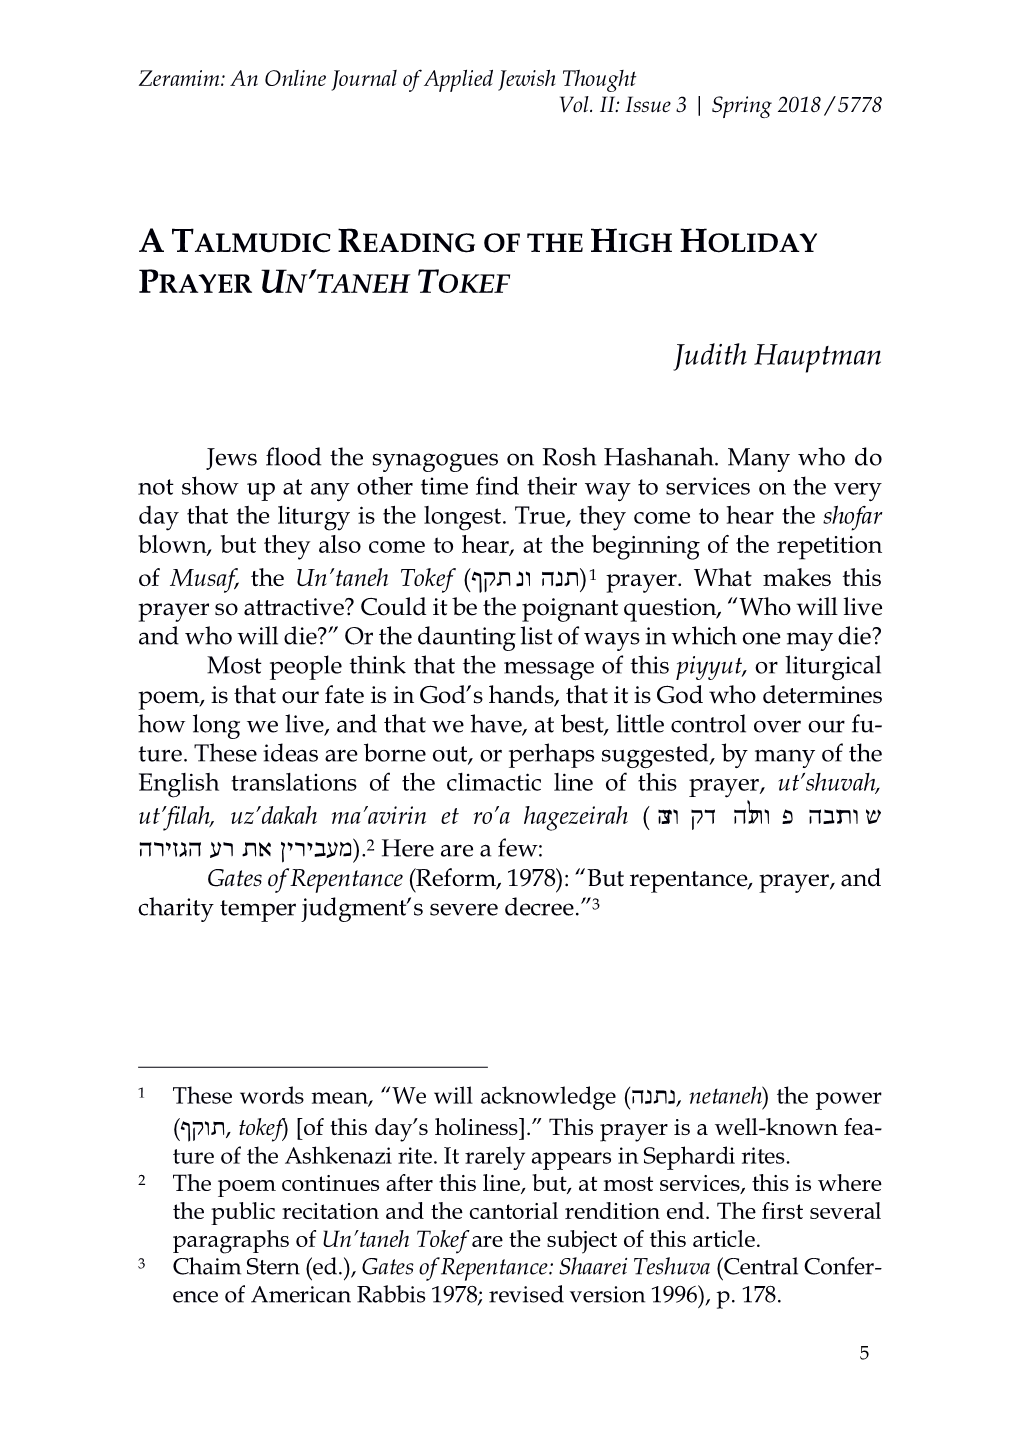 A Talmudic Reading of the High Holiday Prayer Untaneh Tokef